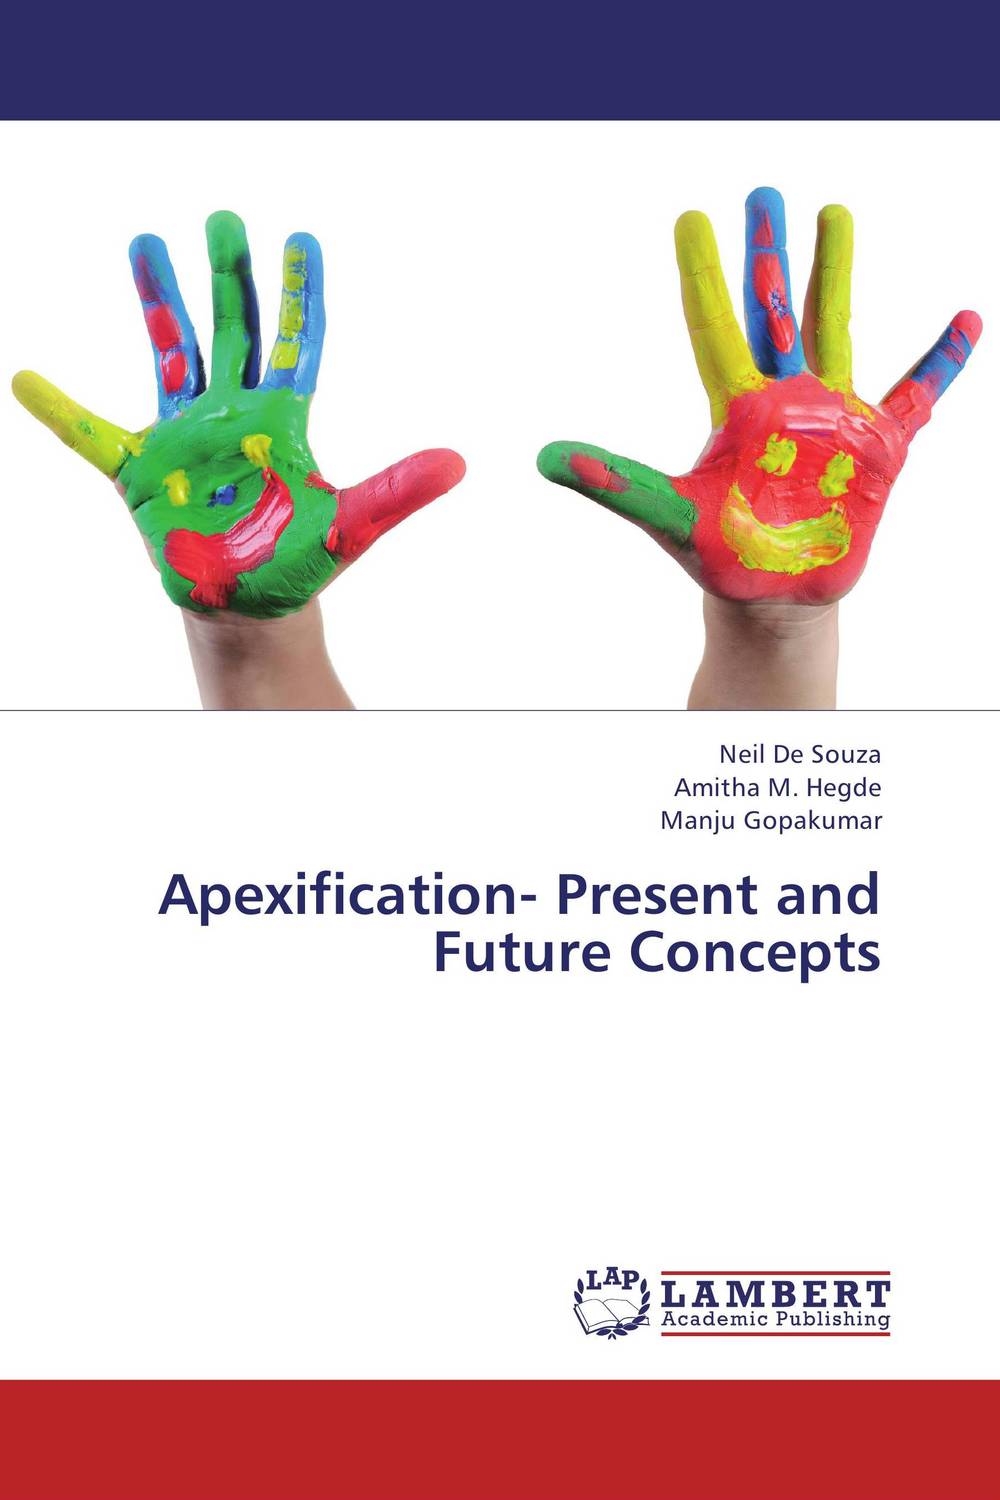 Apexification- Present and Future Concepts